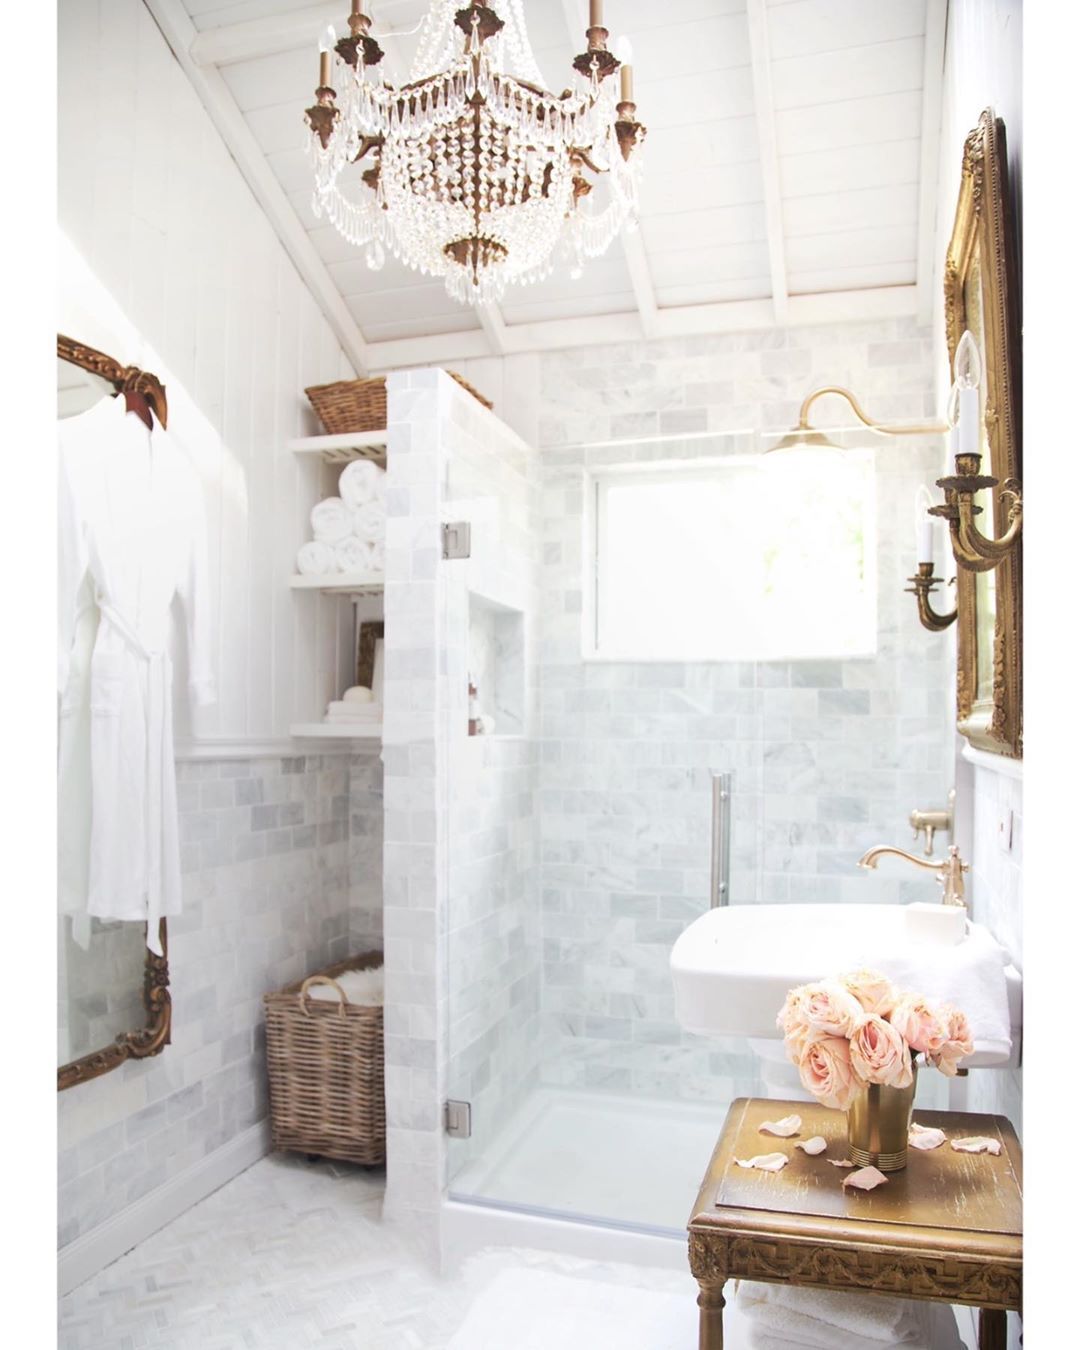 French Country Bathroom with Crystal Chandelier via @frenchcountrycottage